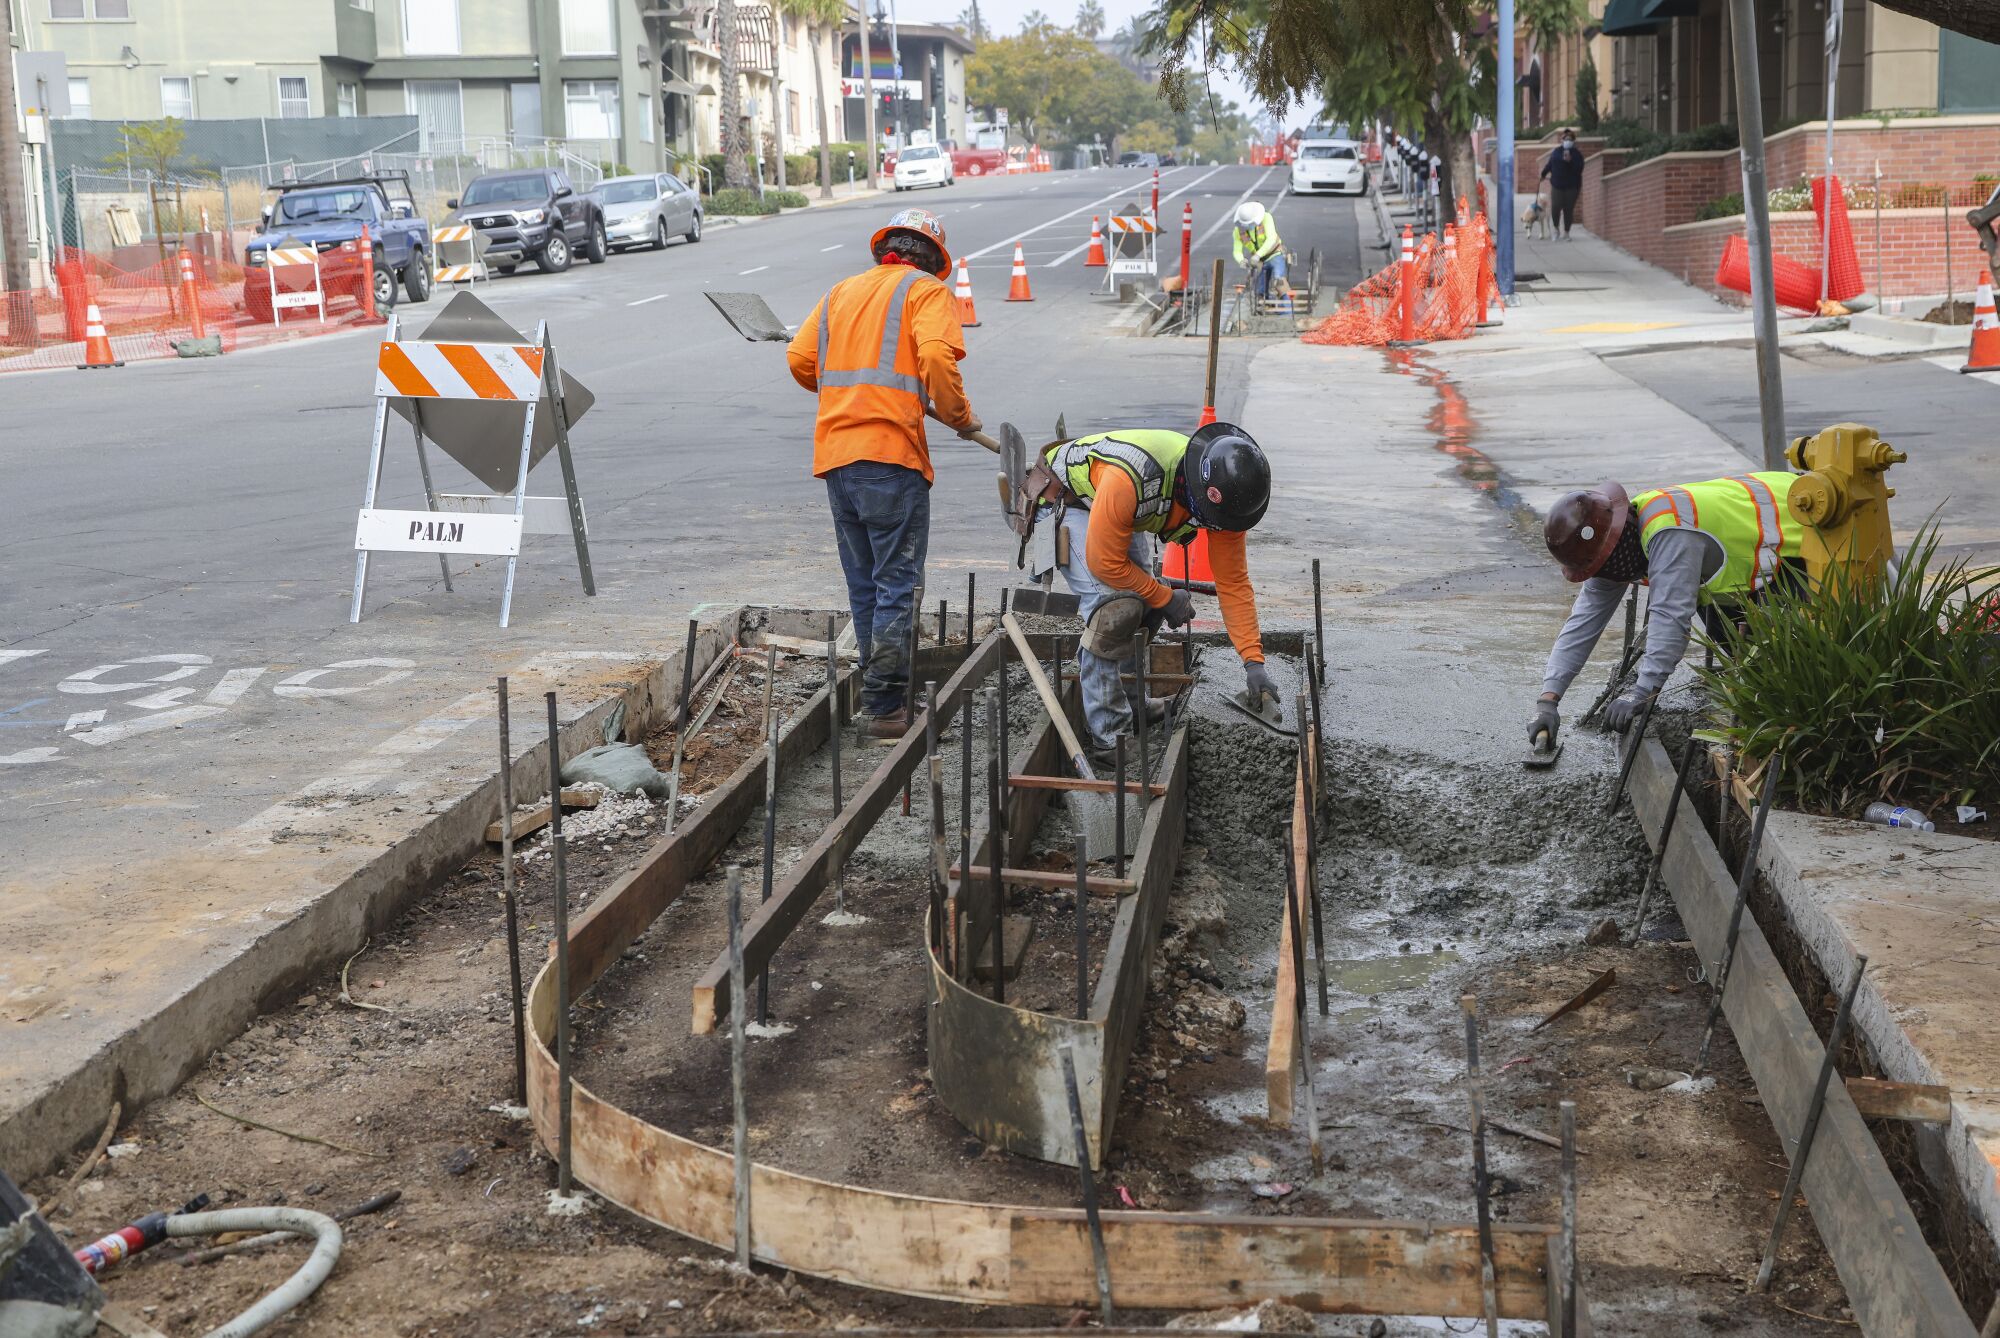 Construction crews work on a parking-protected bike lane at the corner of 4th Avenue and Kalmia Street near Balboa Park.